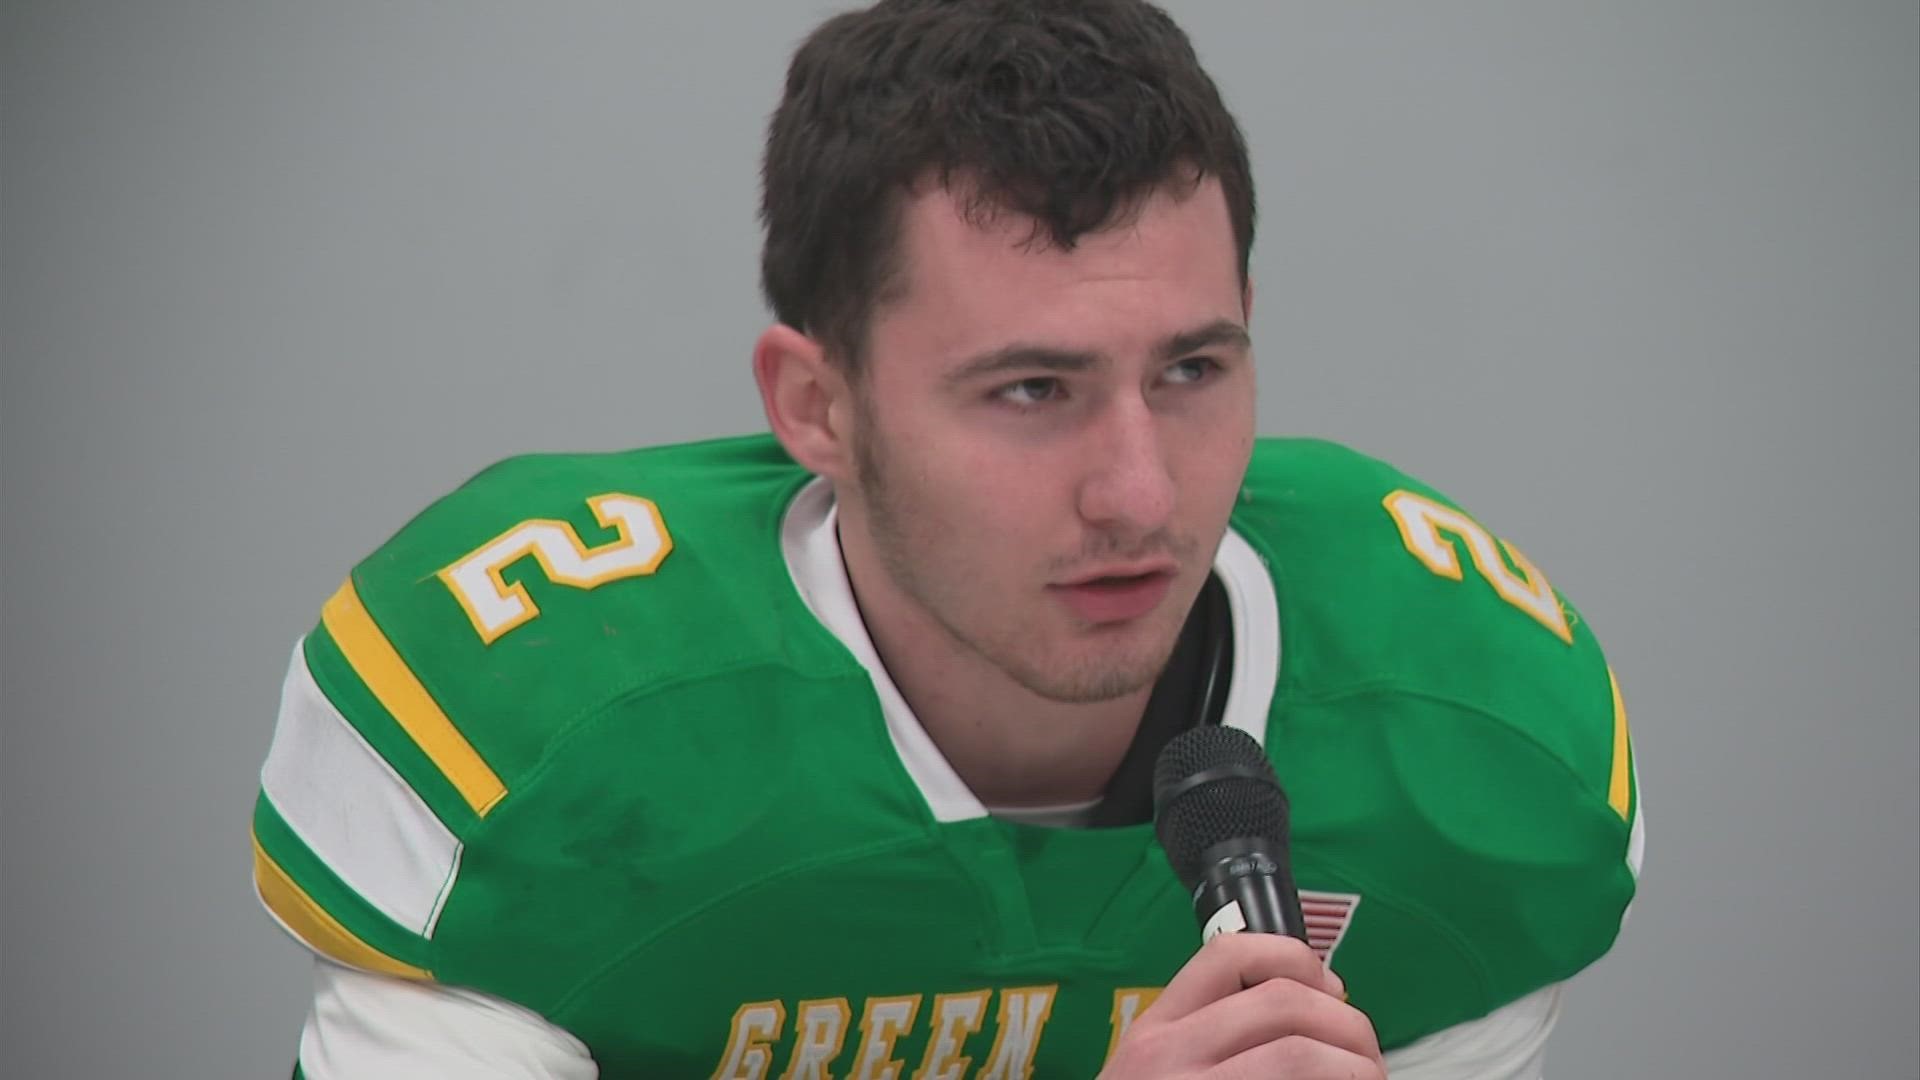 Cole Canter is Newark Catholic's quarterback and helped tie the most wins in the school's history.